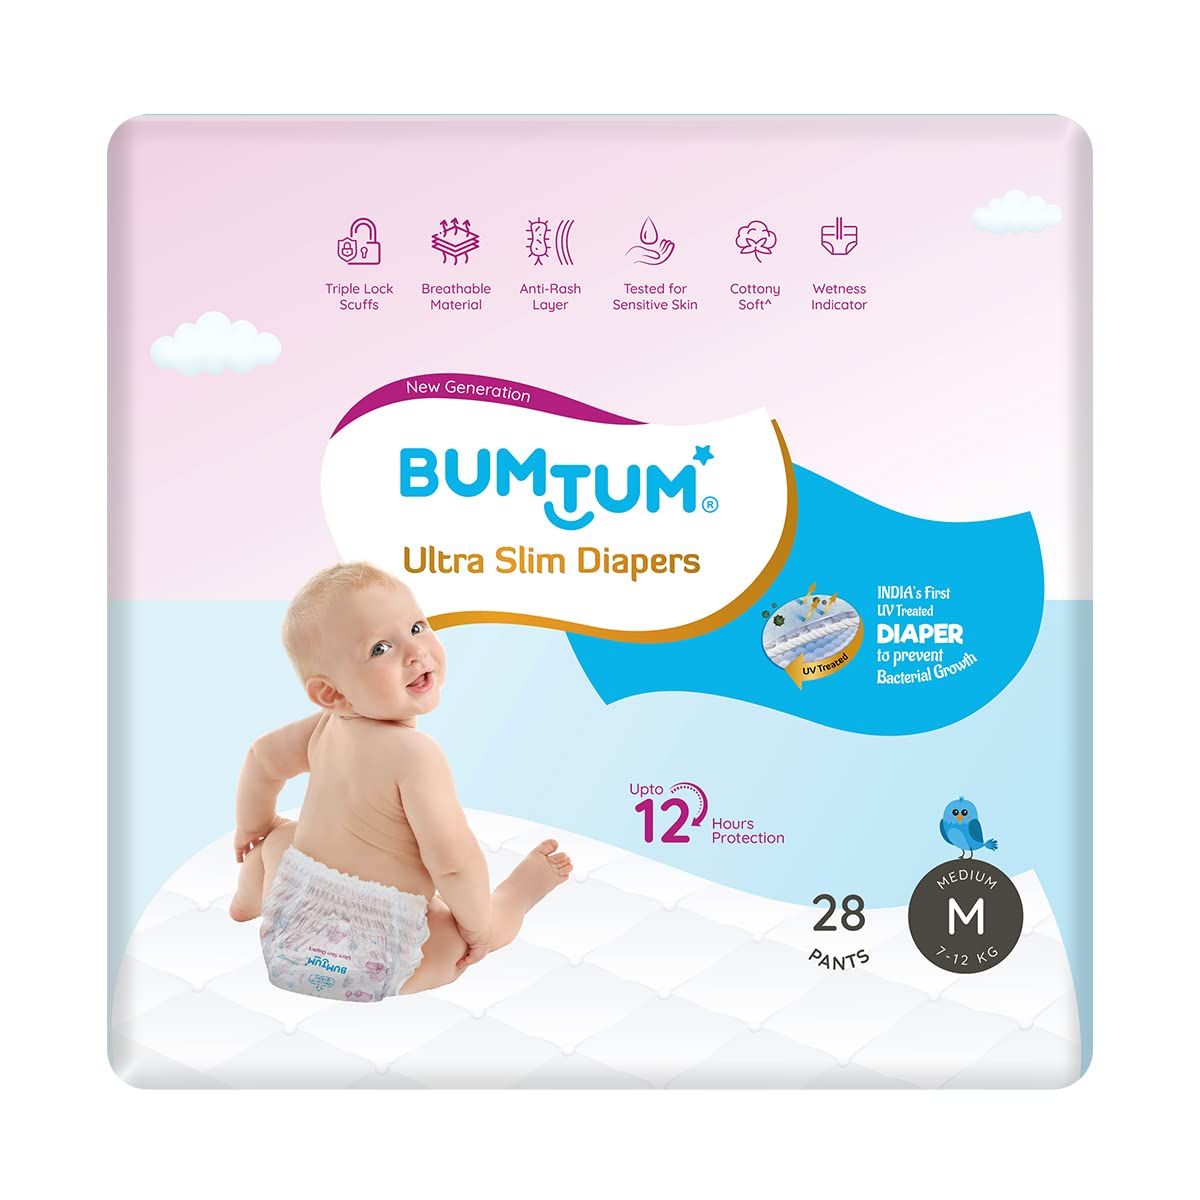 Bumtum Ultra Slim Baby Diaper Pants with Leakage Protection -7 to 12 Kg  (Medium, 28 Count, Pack of 1)